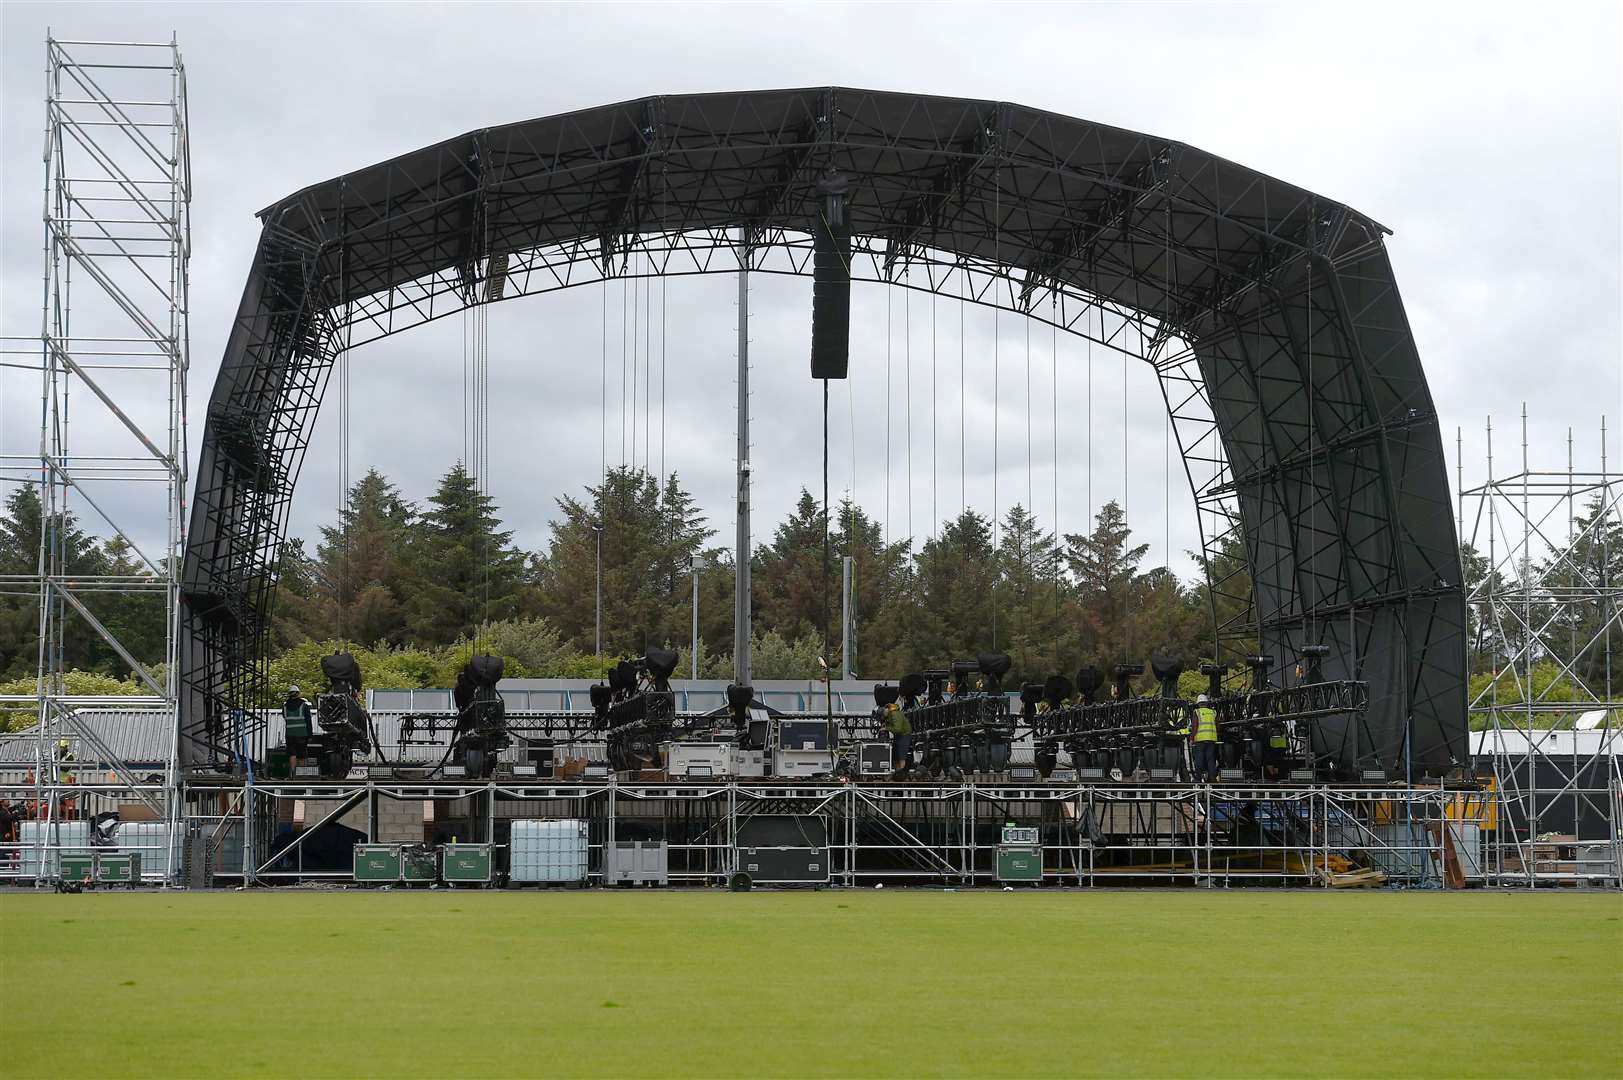 The stage for the Andrea Bocelli and Duran Duran concerts.